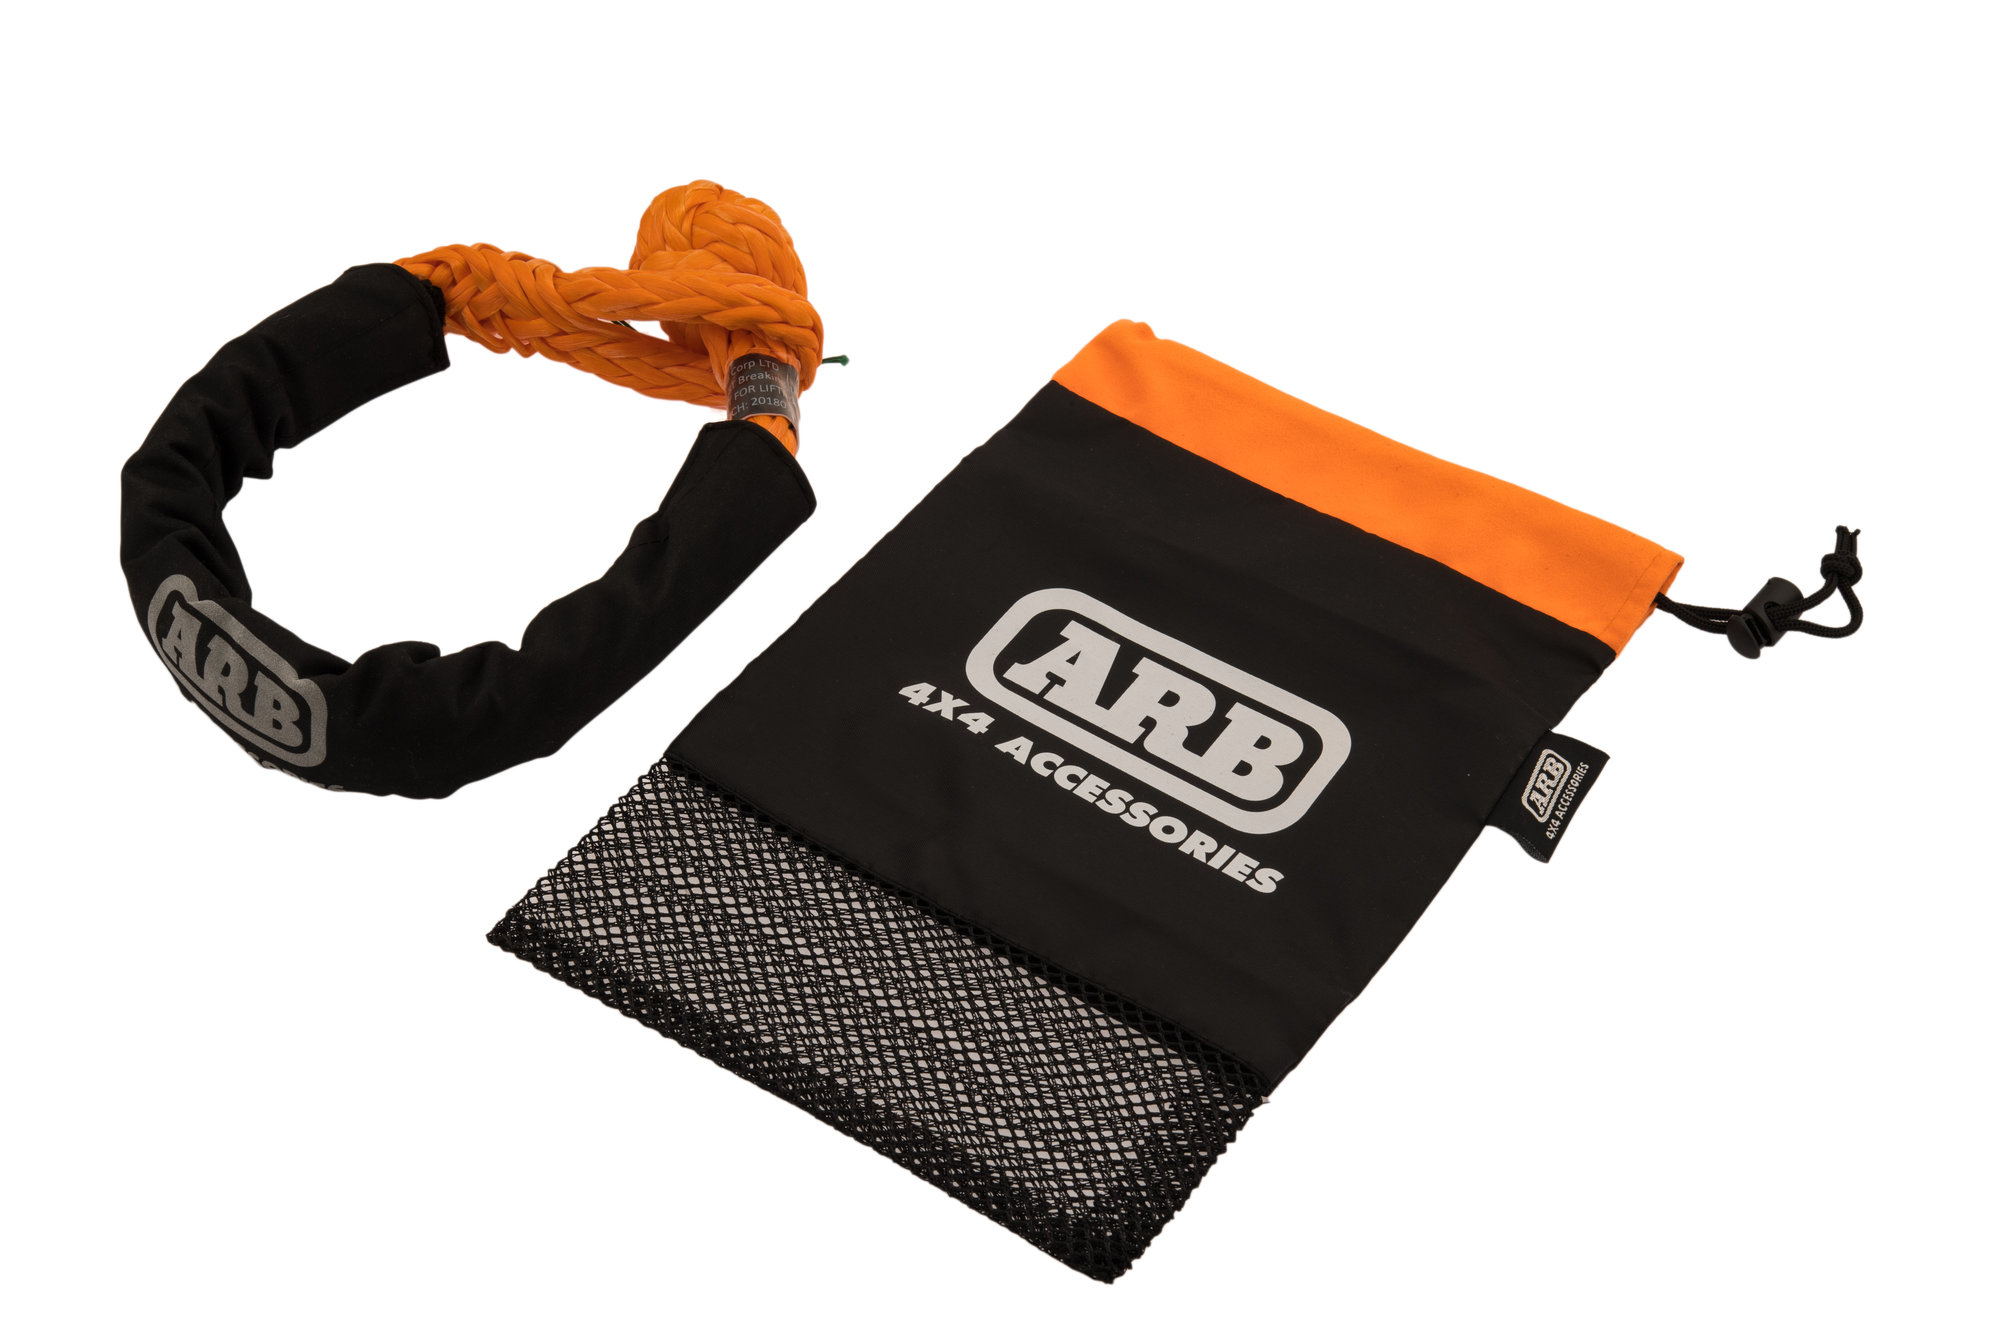 ARB ARB2018 Soft Rope Recovery Connect Shackle up to 32000 Lbs Includes Mesh Gift Bag 14.5 Ton